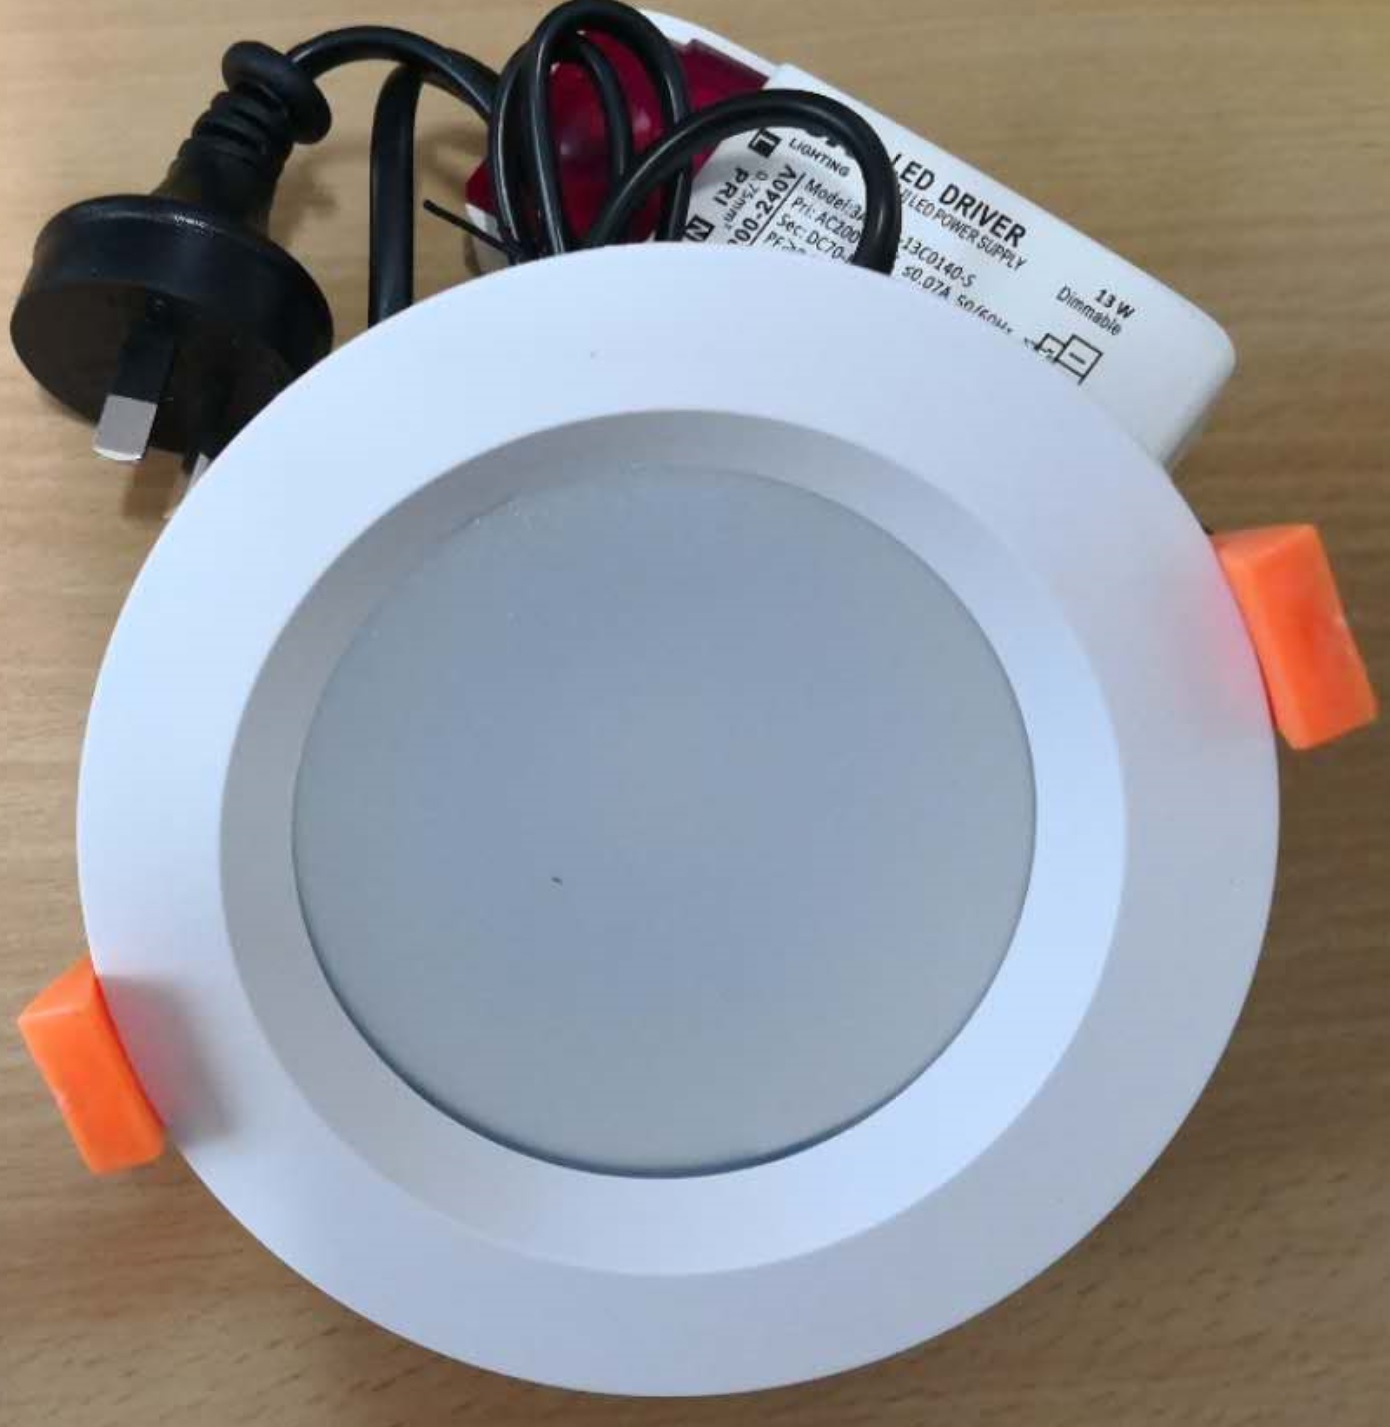 13w-recessed-dimmable-led-downlight-with-3-color-selector-switch-3000k-4000k-5000k